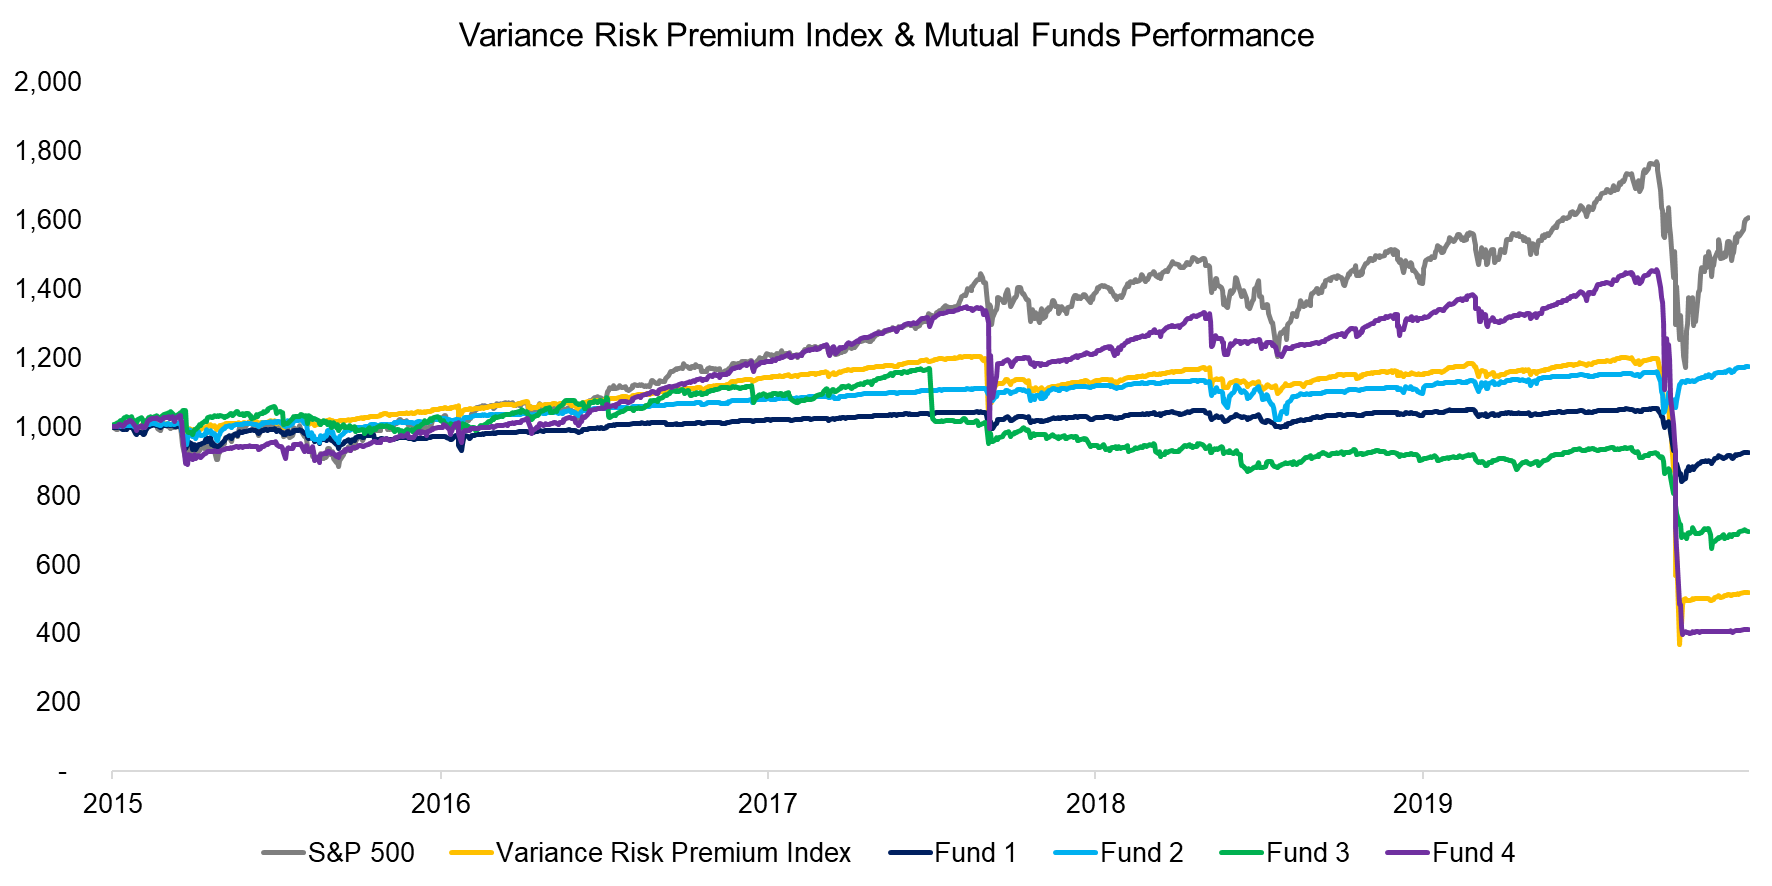 Variance Risk Premium Index & Mutual Funds Performance